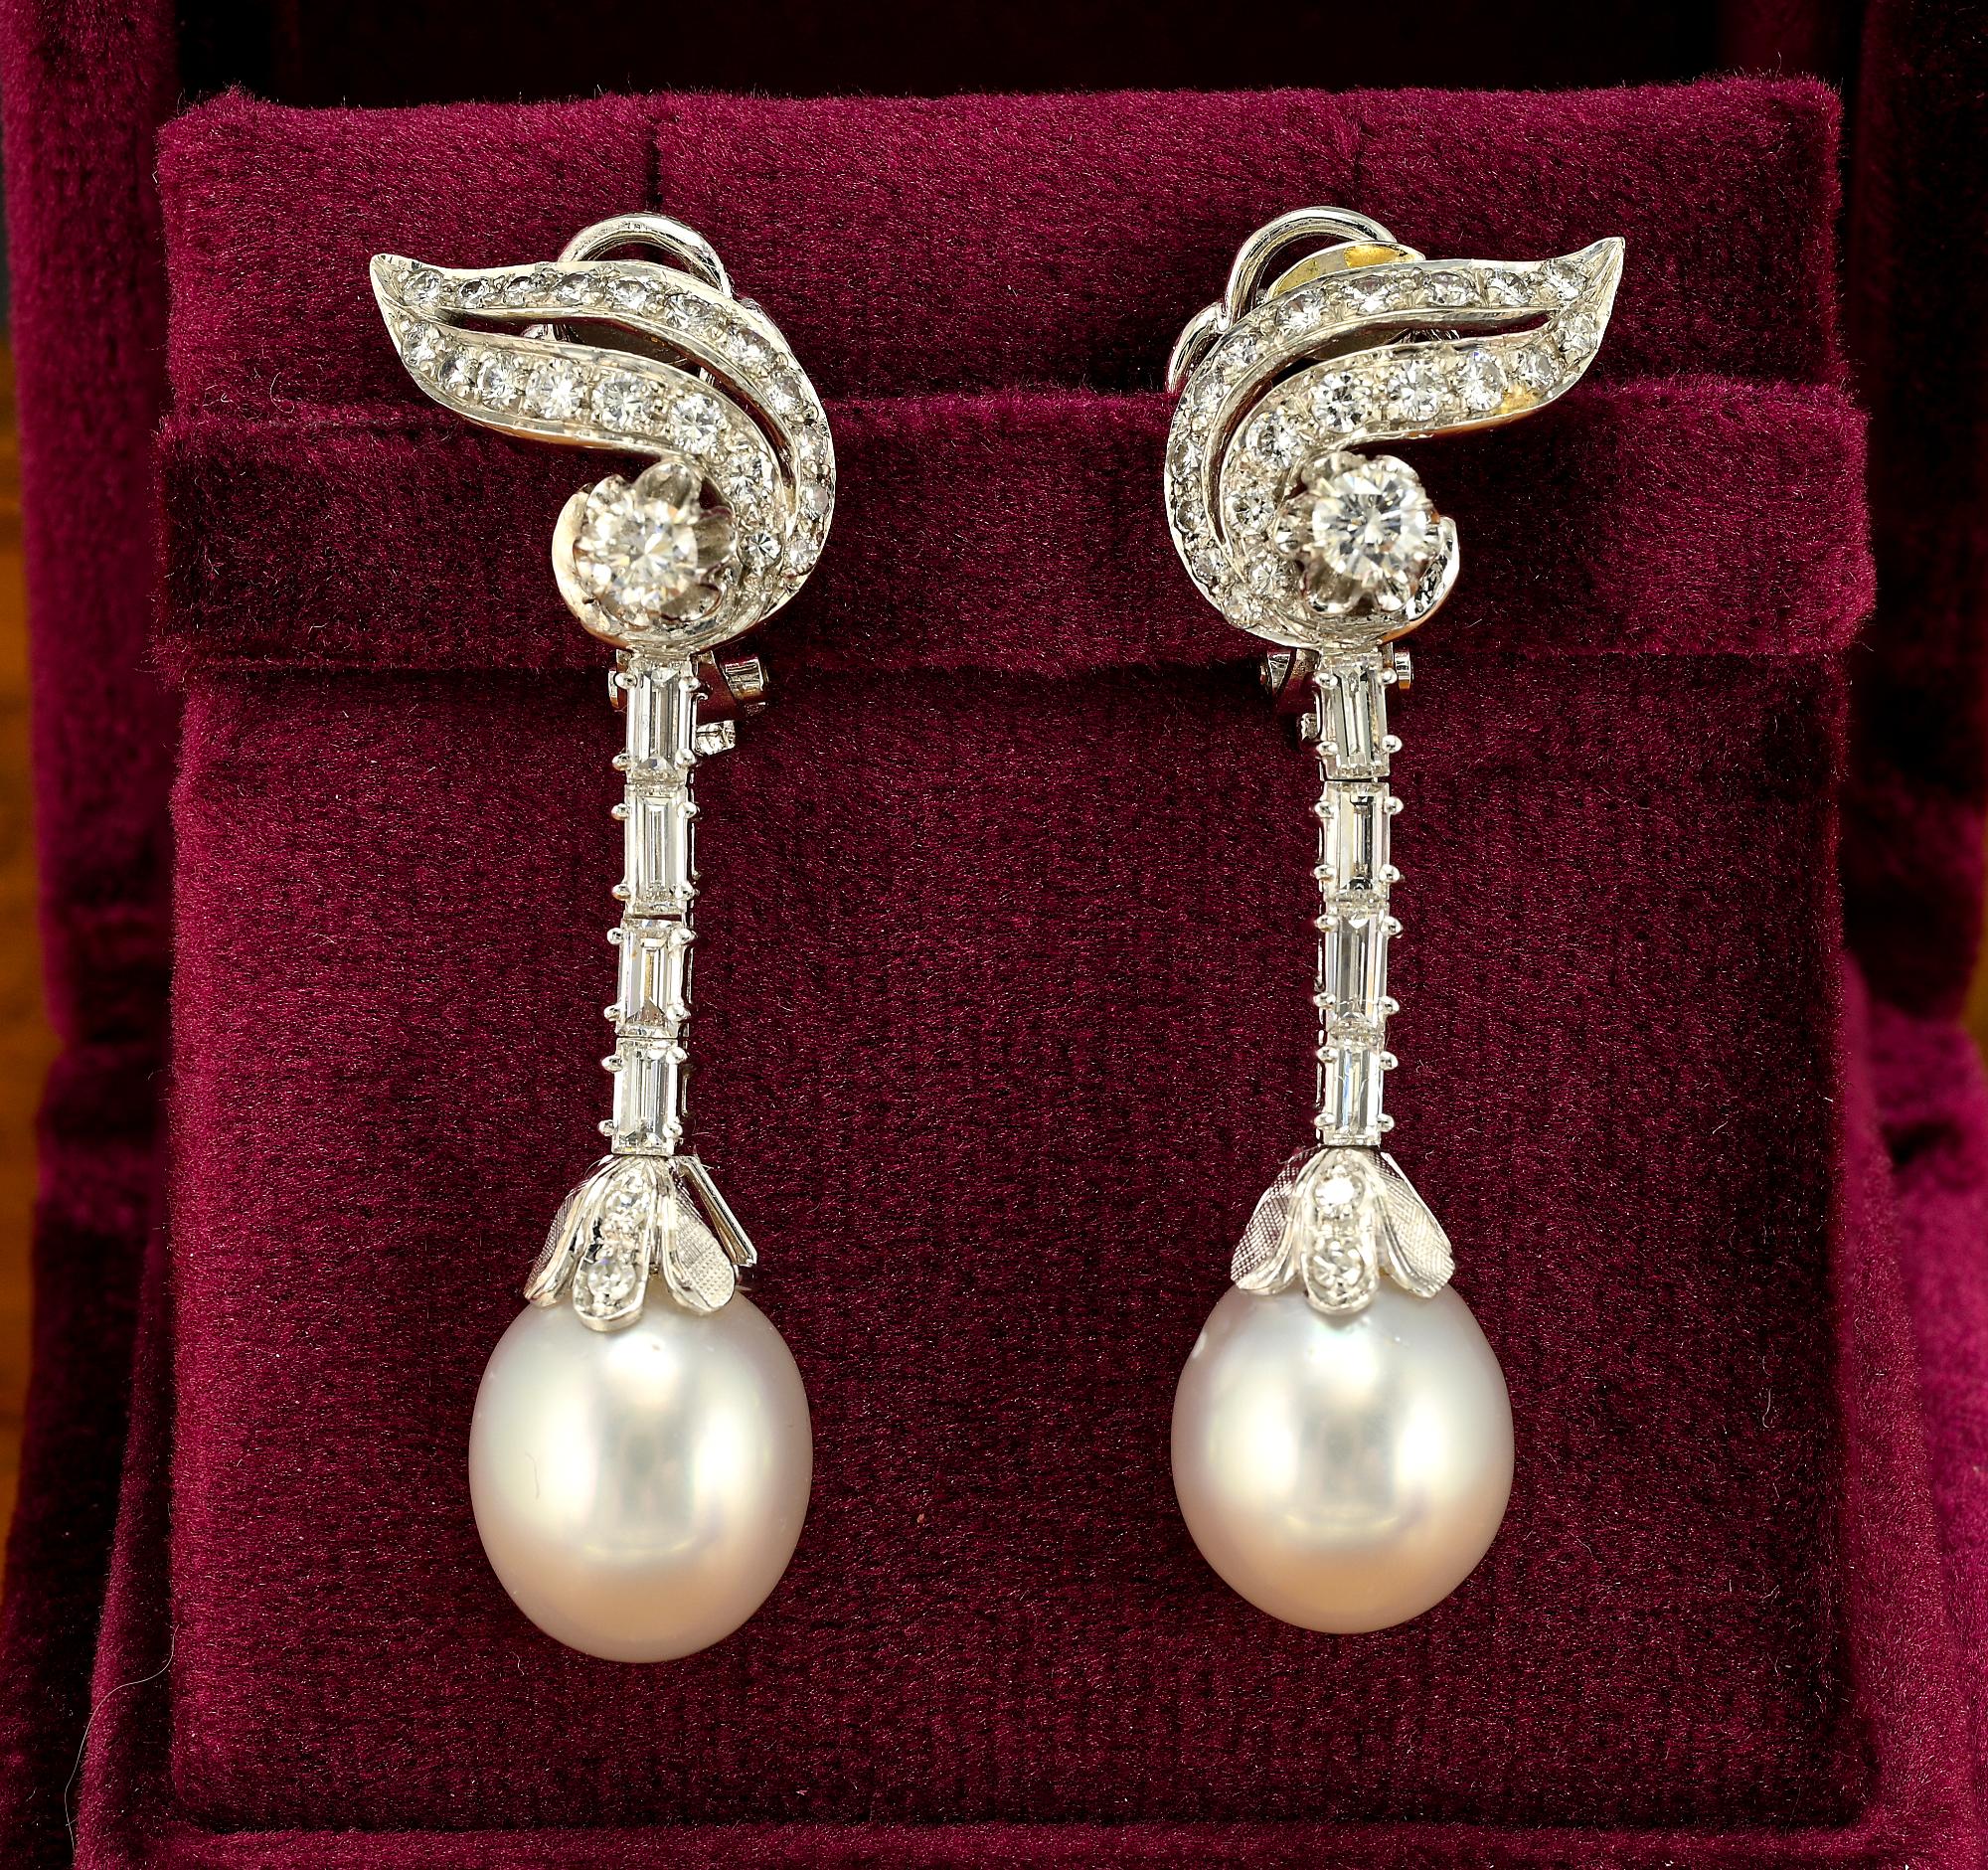 These charming Retro earrings are 1945 circa
18 KT white gold very fine workmanship expressed in a charming timeless design with a top bow and a connecting line leading to the suspend Pearl
Set throughout with a selection of bright white Diamonds